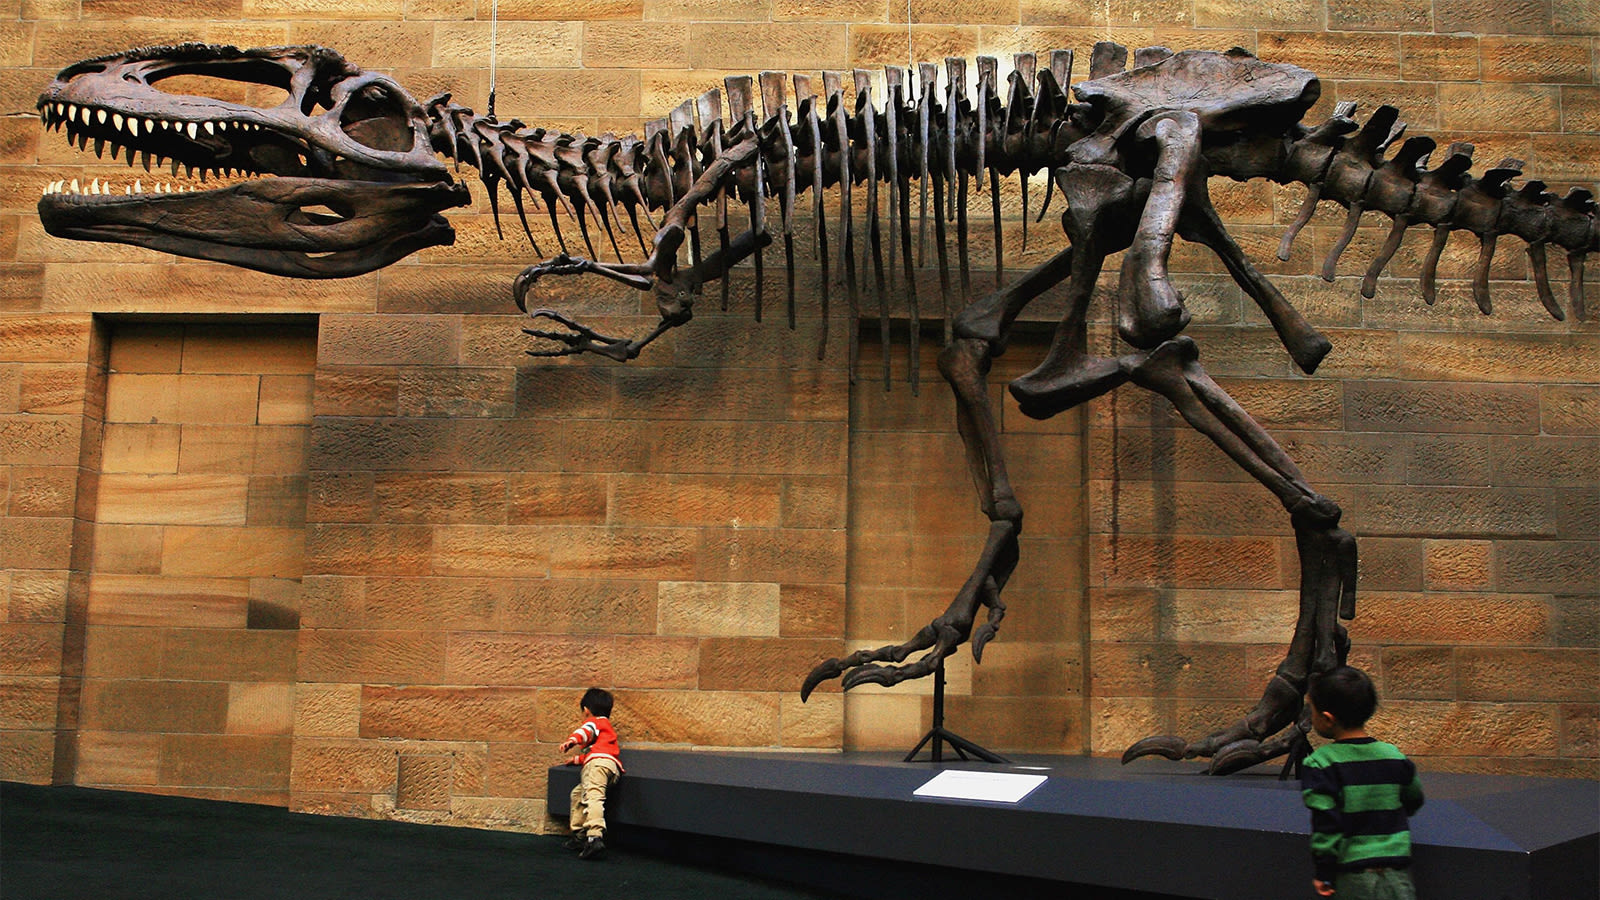 The Largest Carnivorous Dinosaur May Not Have Been T. Rex